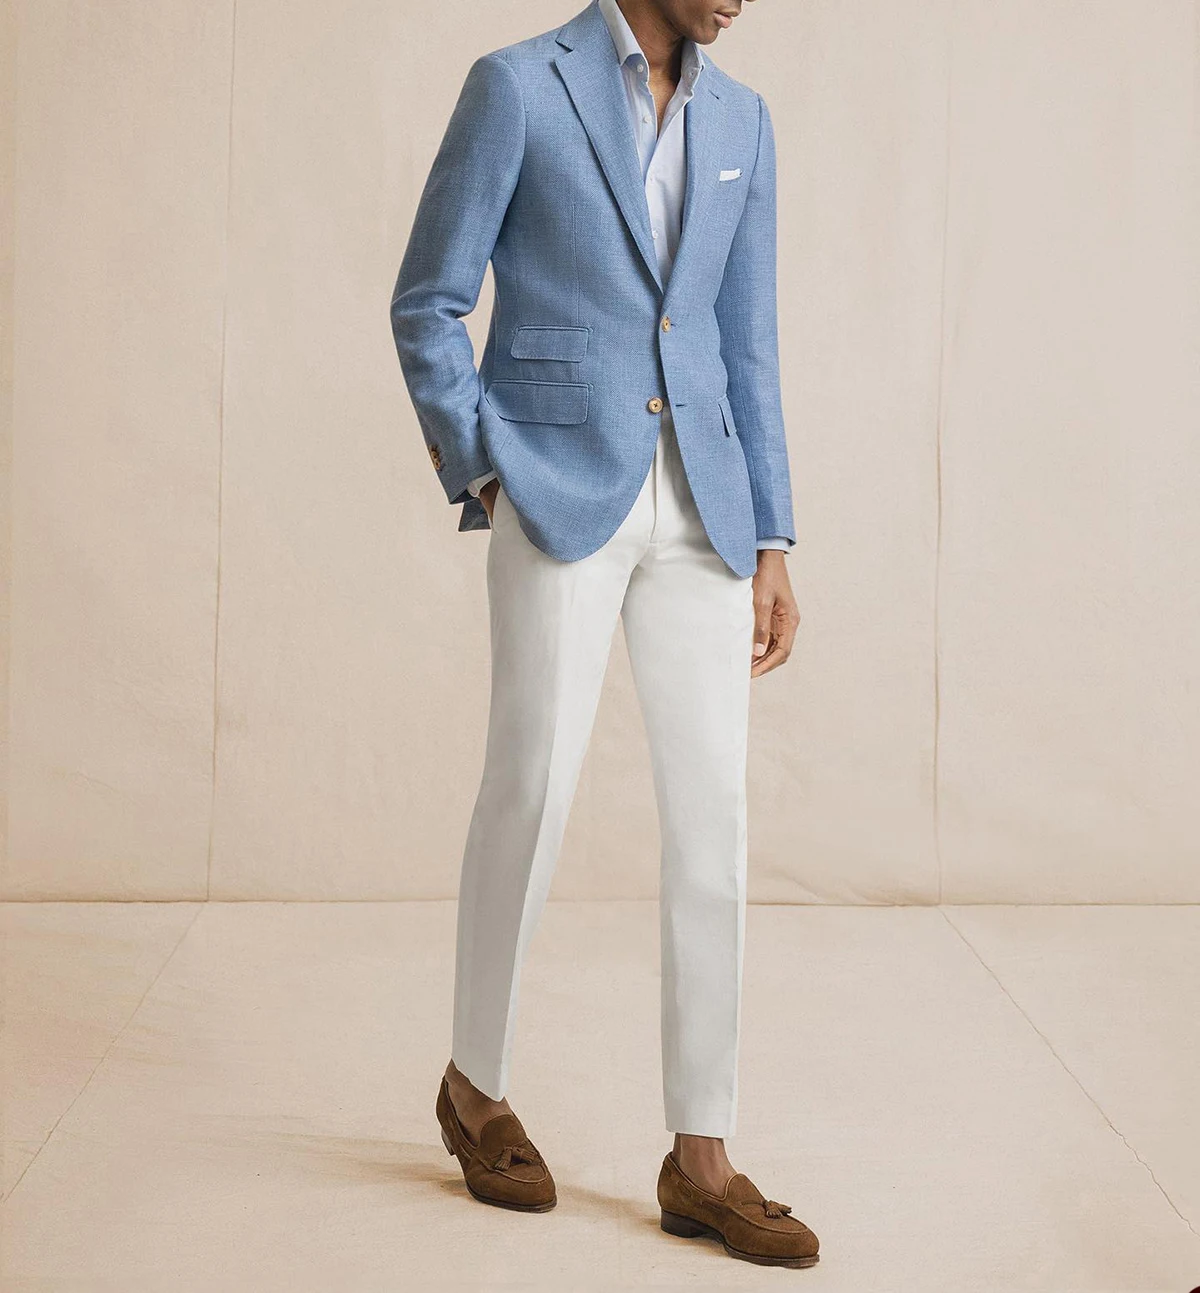 Blue Blazer with White and Blue Dress Pants Outfits For Men (182 ideas &  outfits) | Lookastic